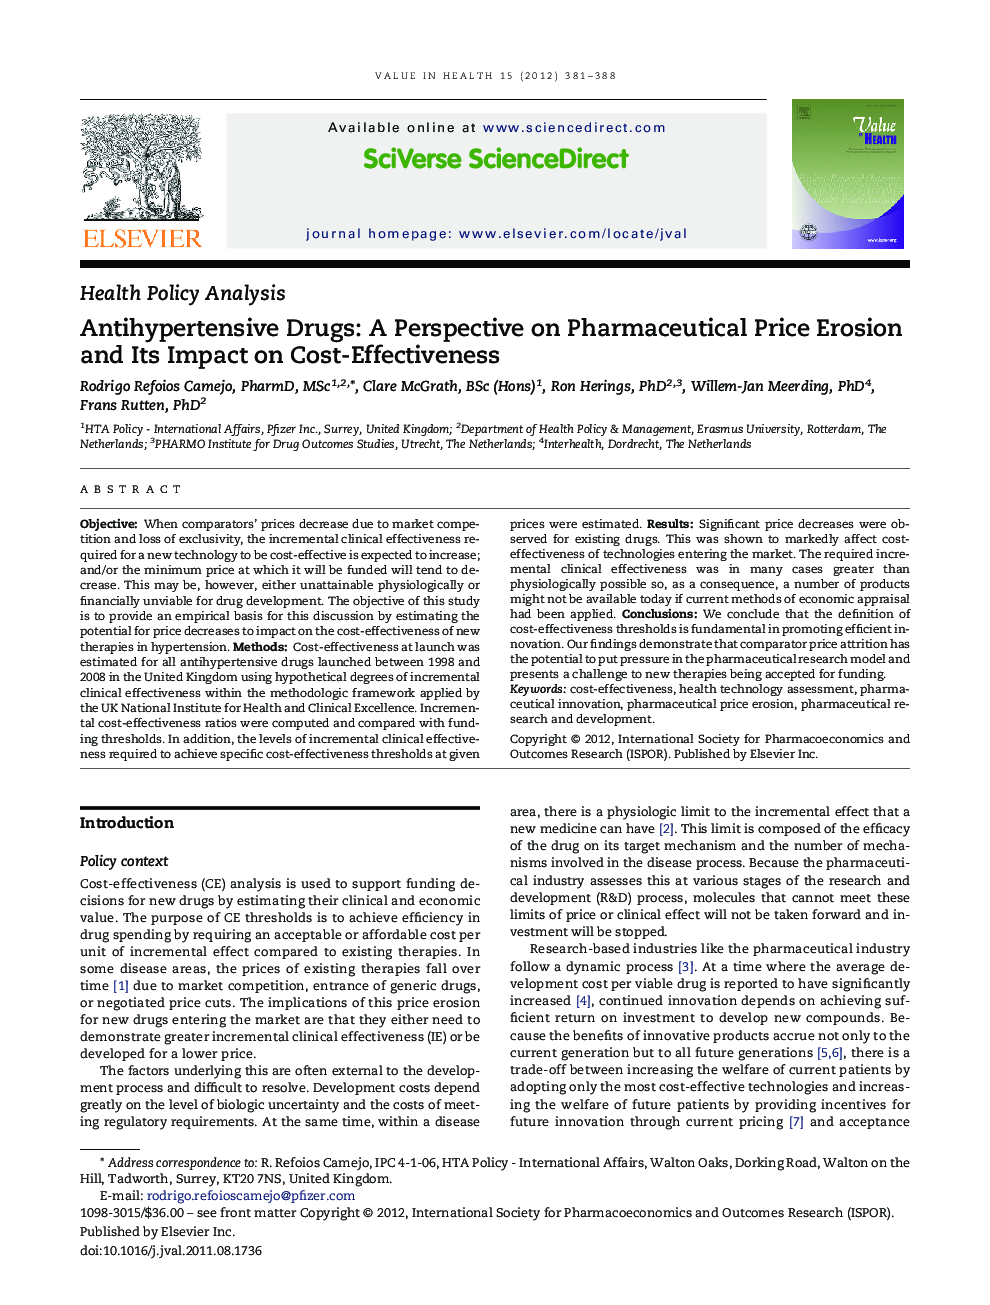 Antihypertensive Drugs: A Perspective on Pharmaceutical Price Erosion and Its Impact on Cost-Effectiveness